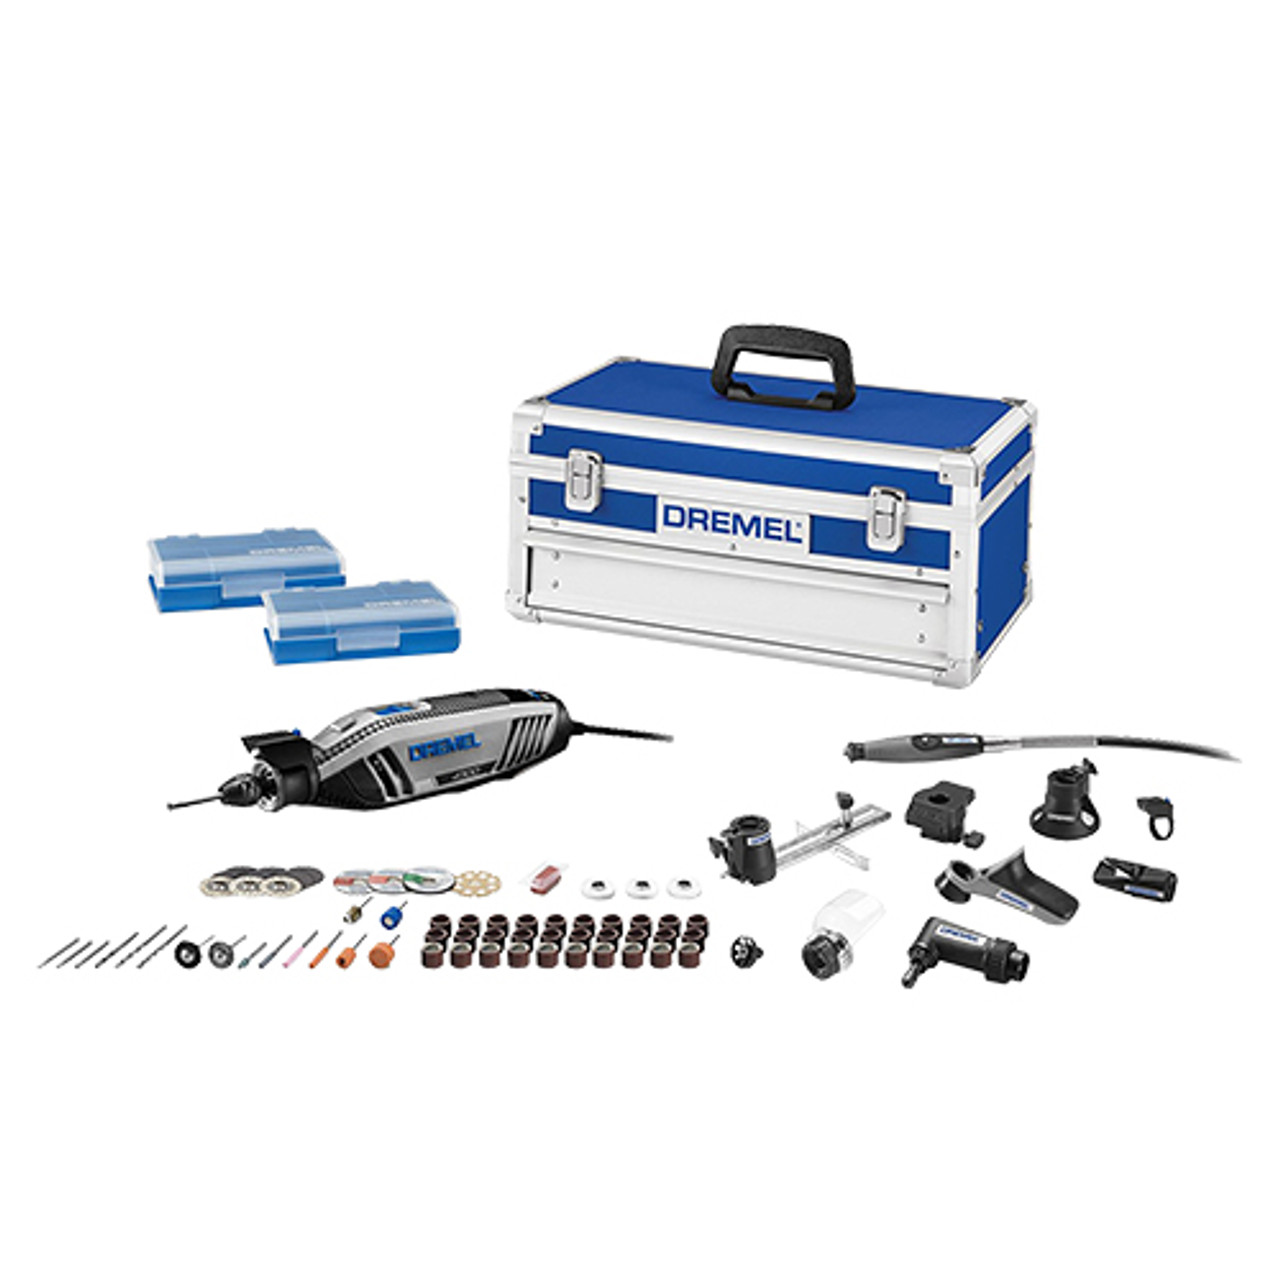 Dremel 4300 Rotary Tool, 64-Piece Kit - Midwest Technology Products